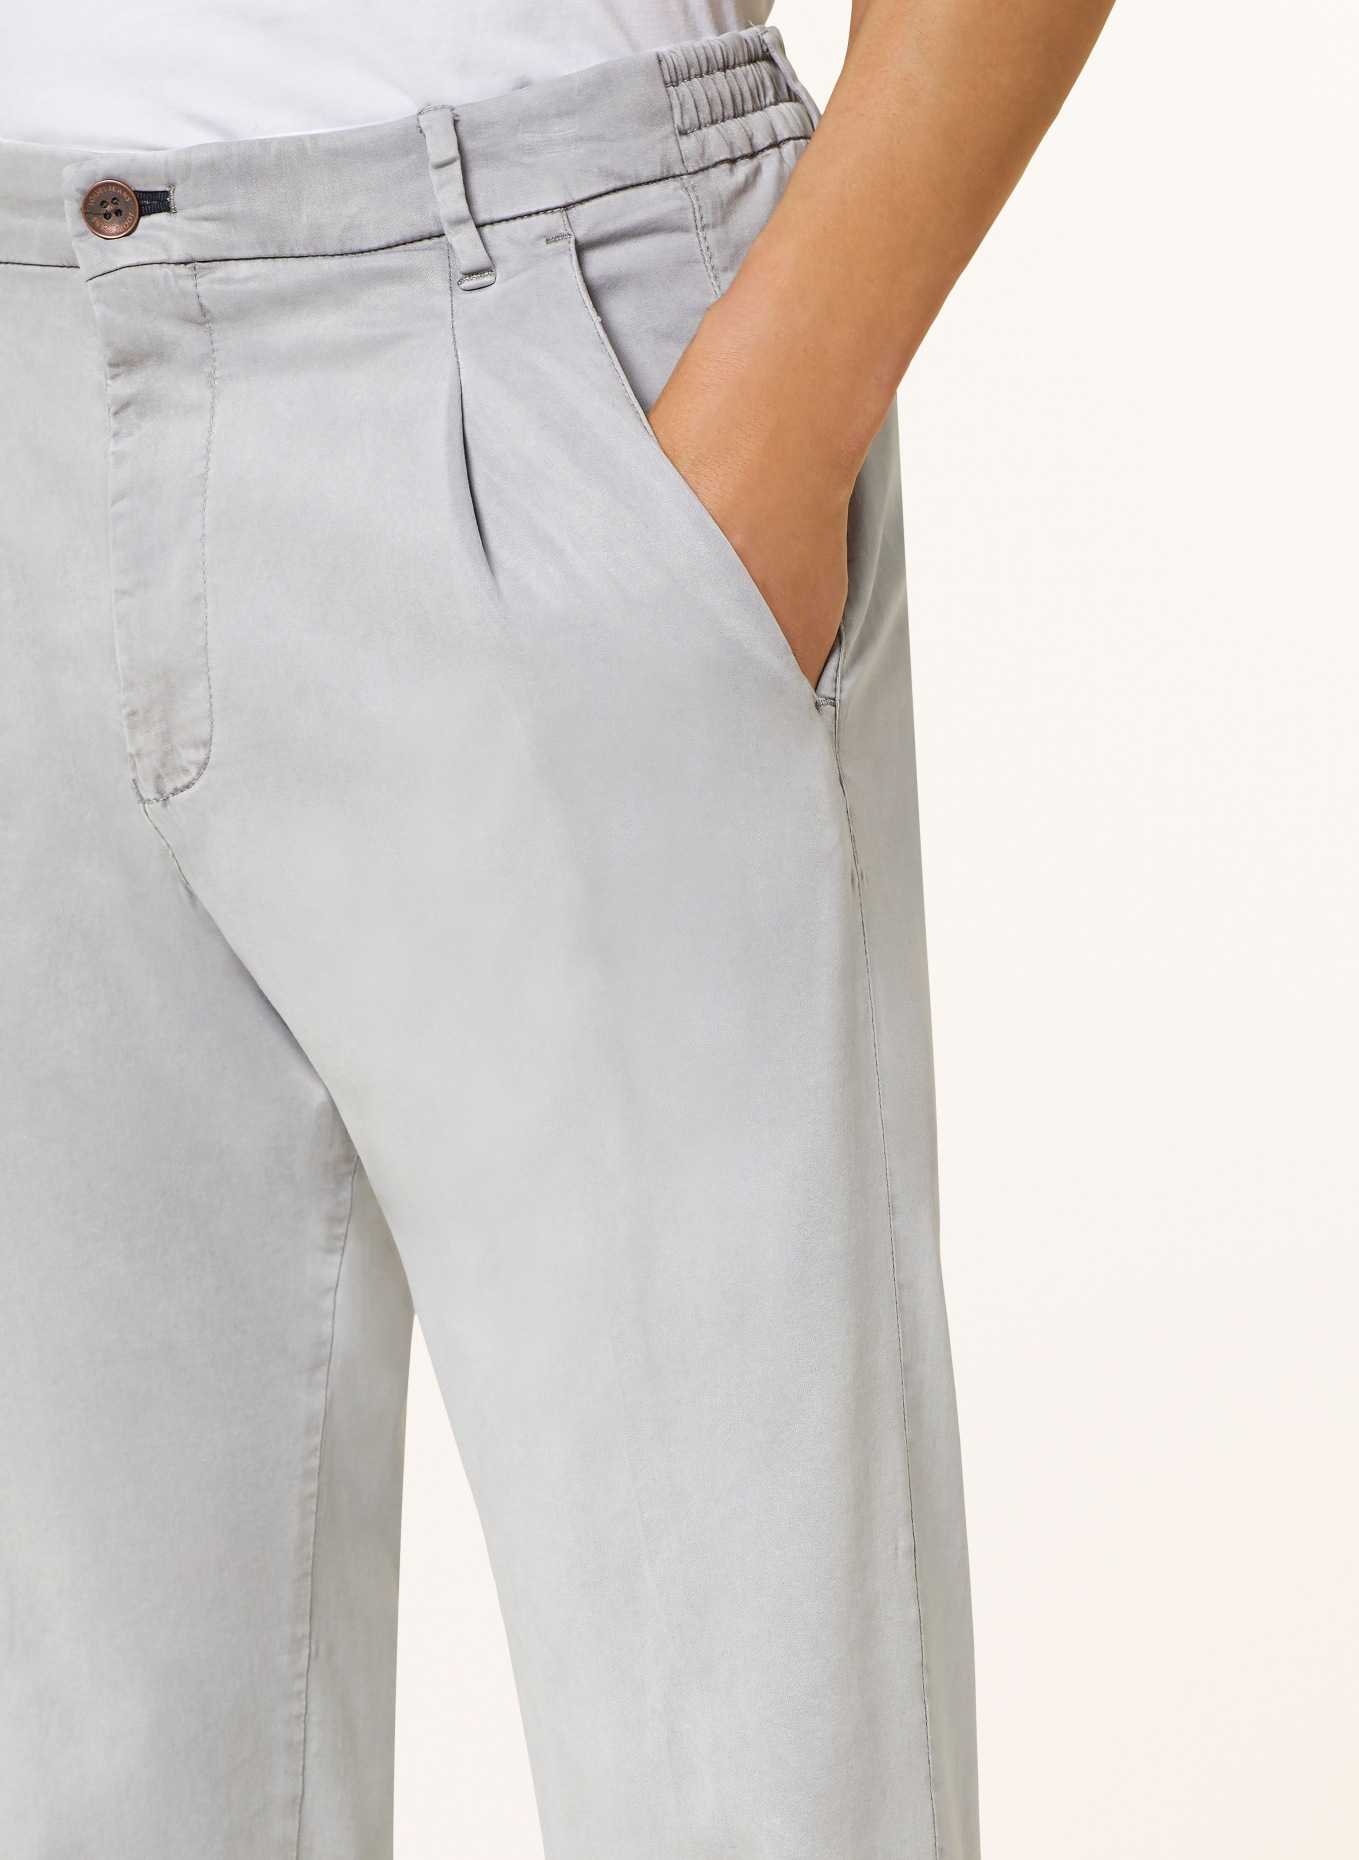 JOOP! JEANS Chinos regular fit, Color: GRAY (Image 5)